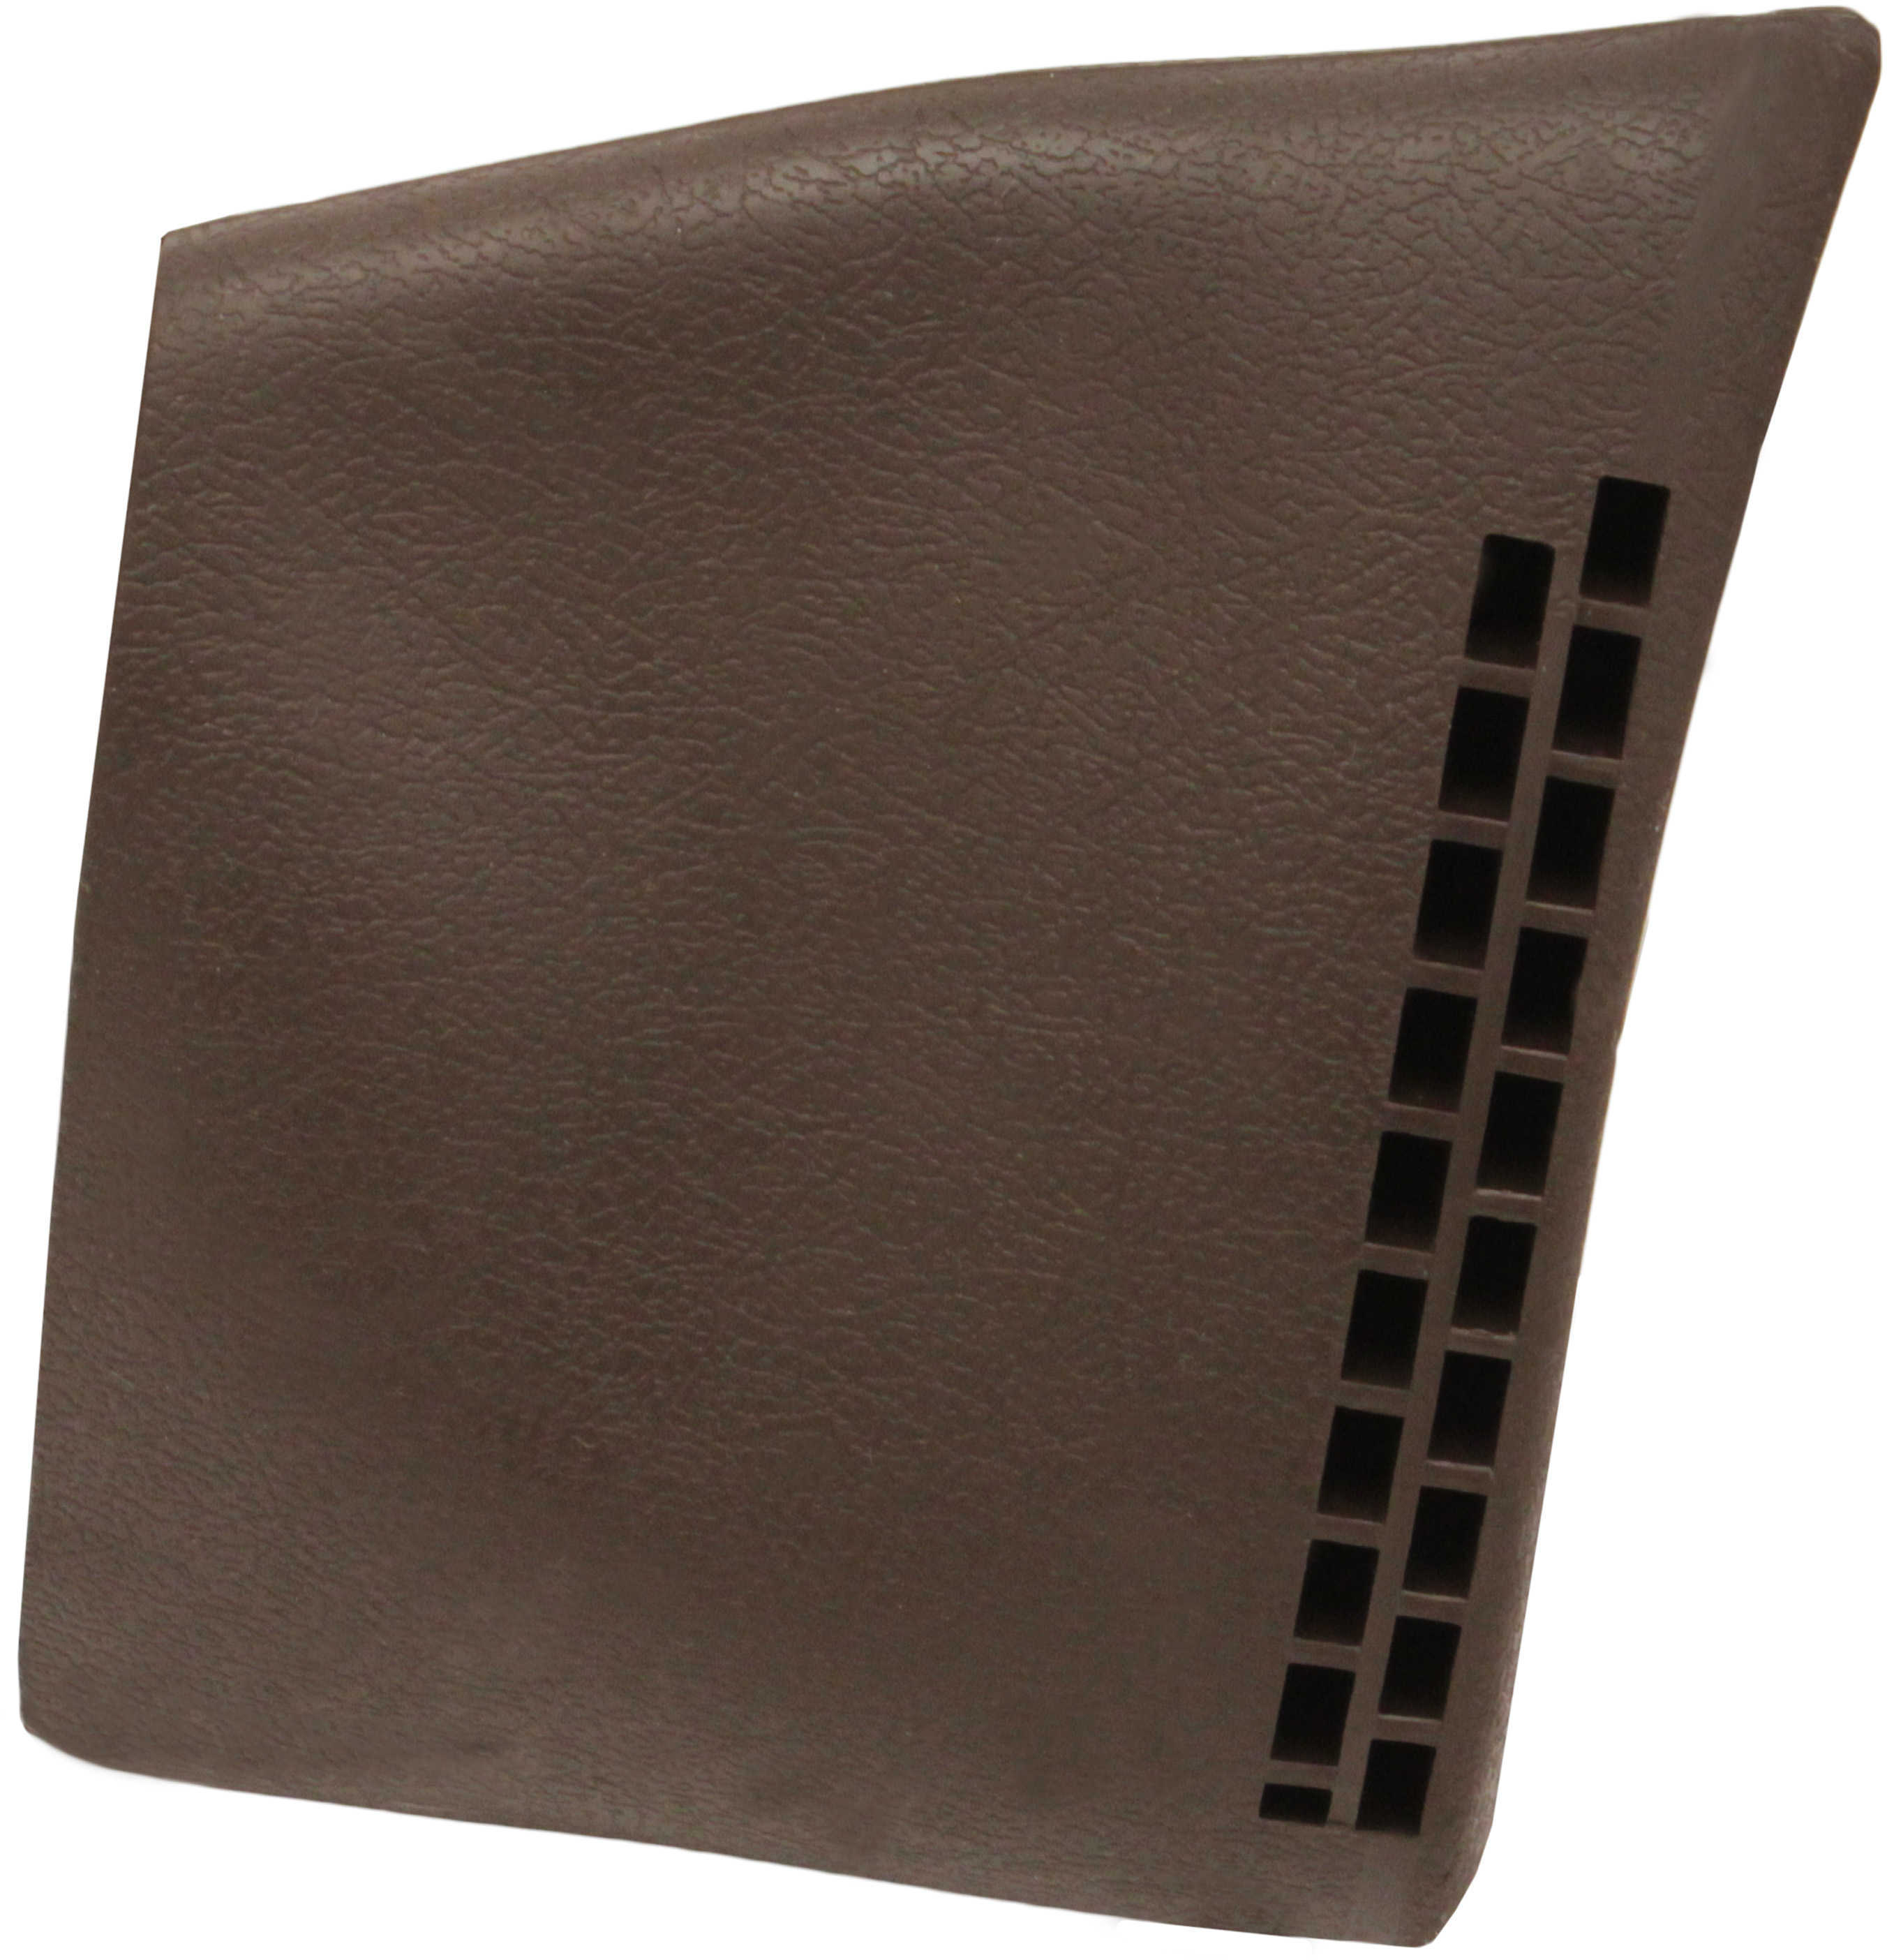 Butler Creek Slip-On Recoil Pad Small Brown